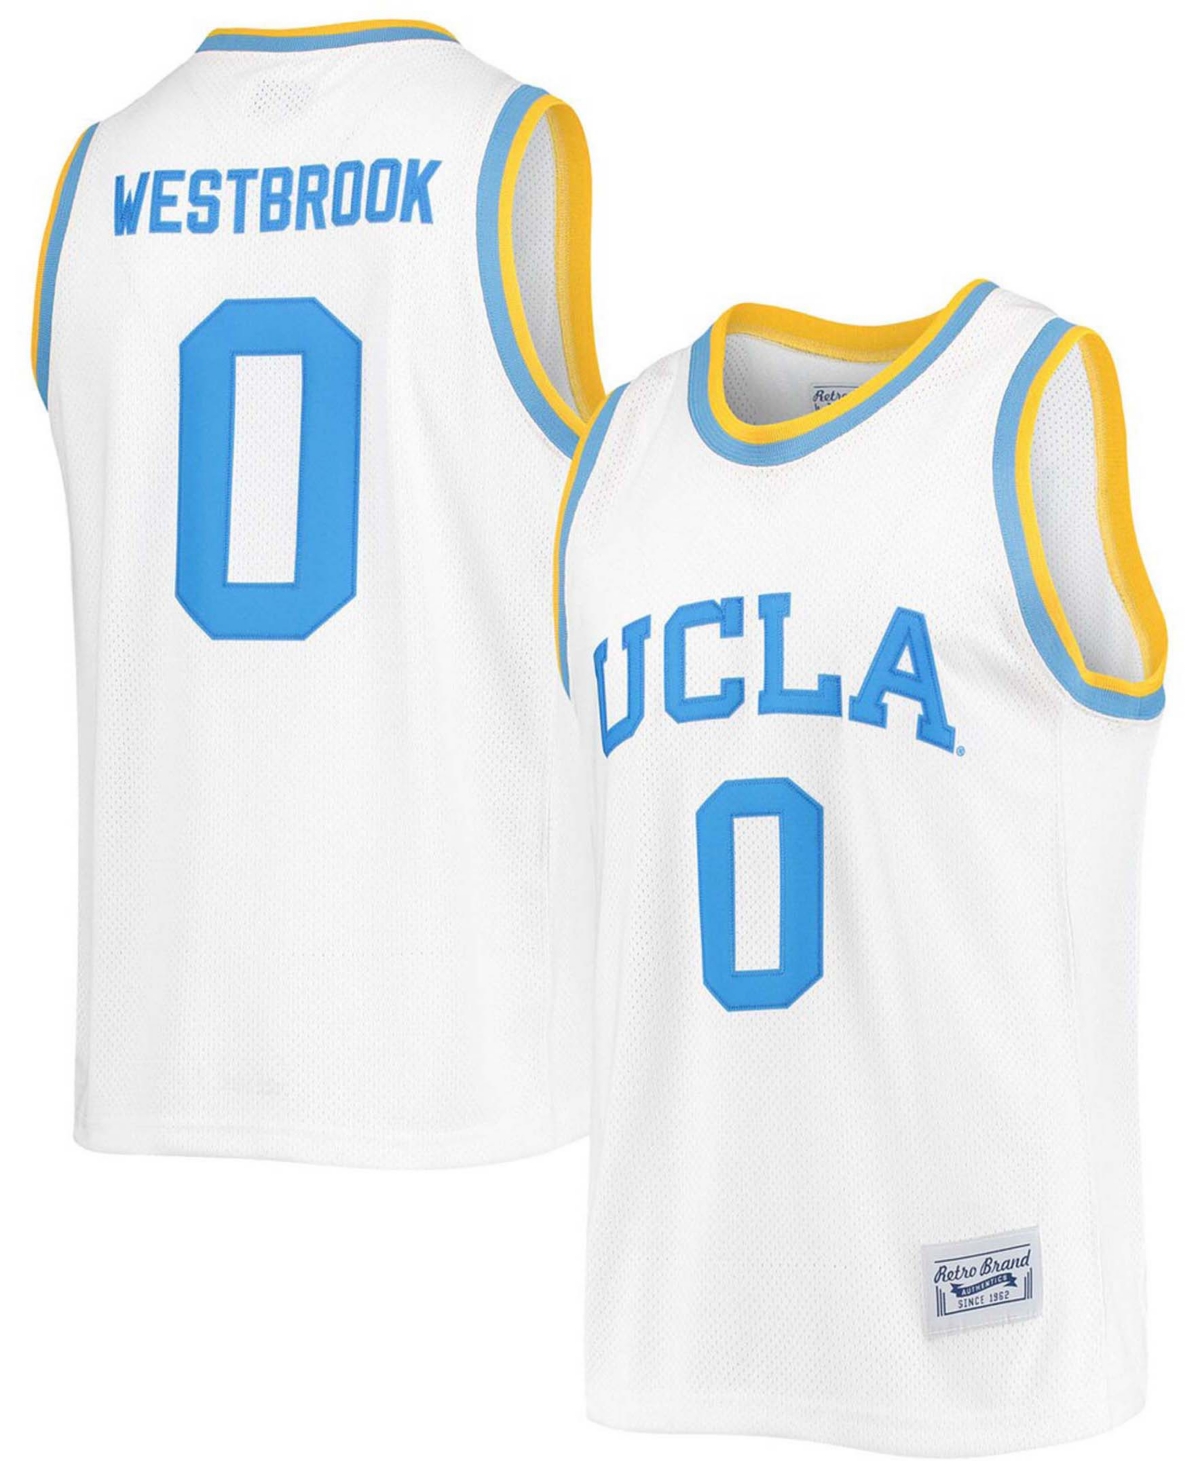 Men's Russell Westbrook Ucla Bruins Commemorative Classic Basketball Jersey - White